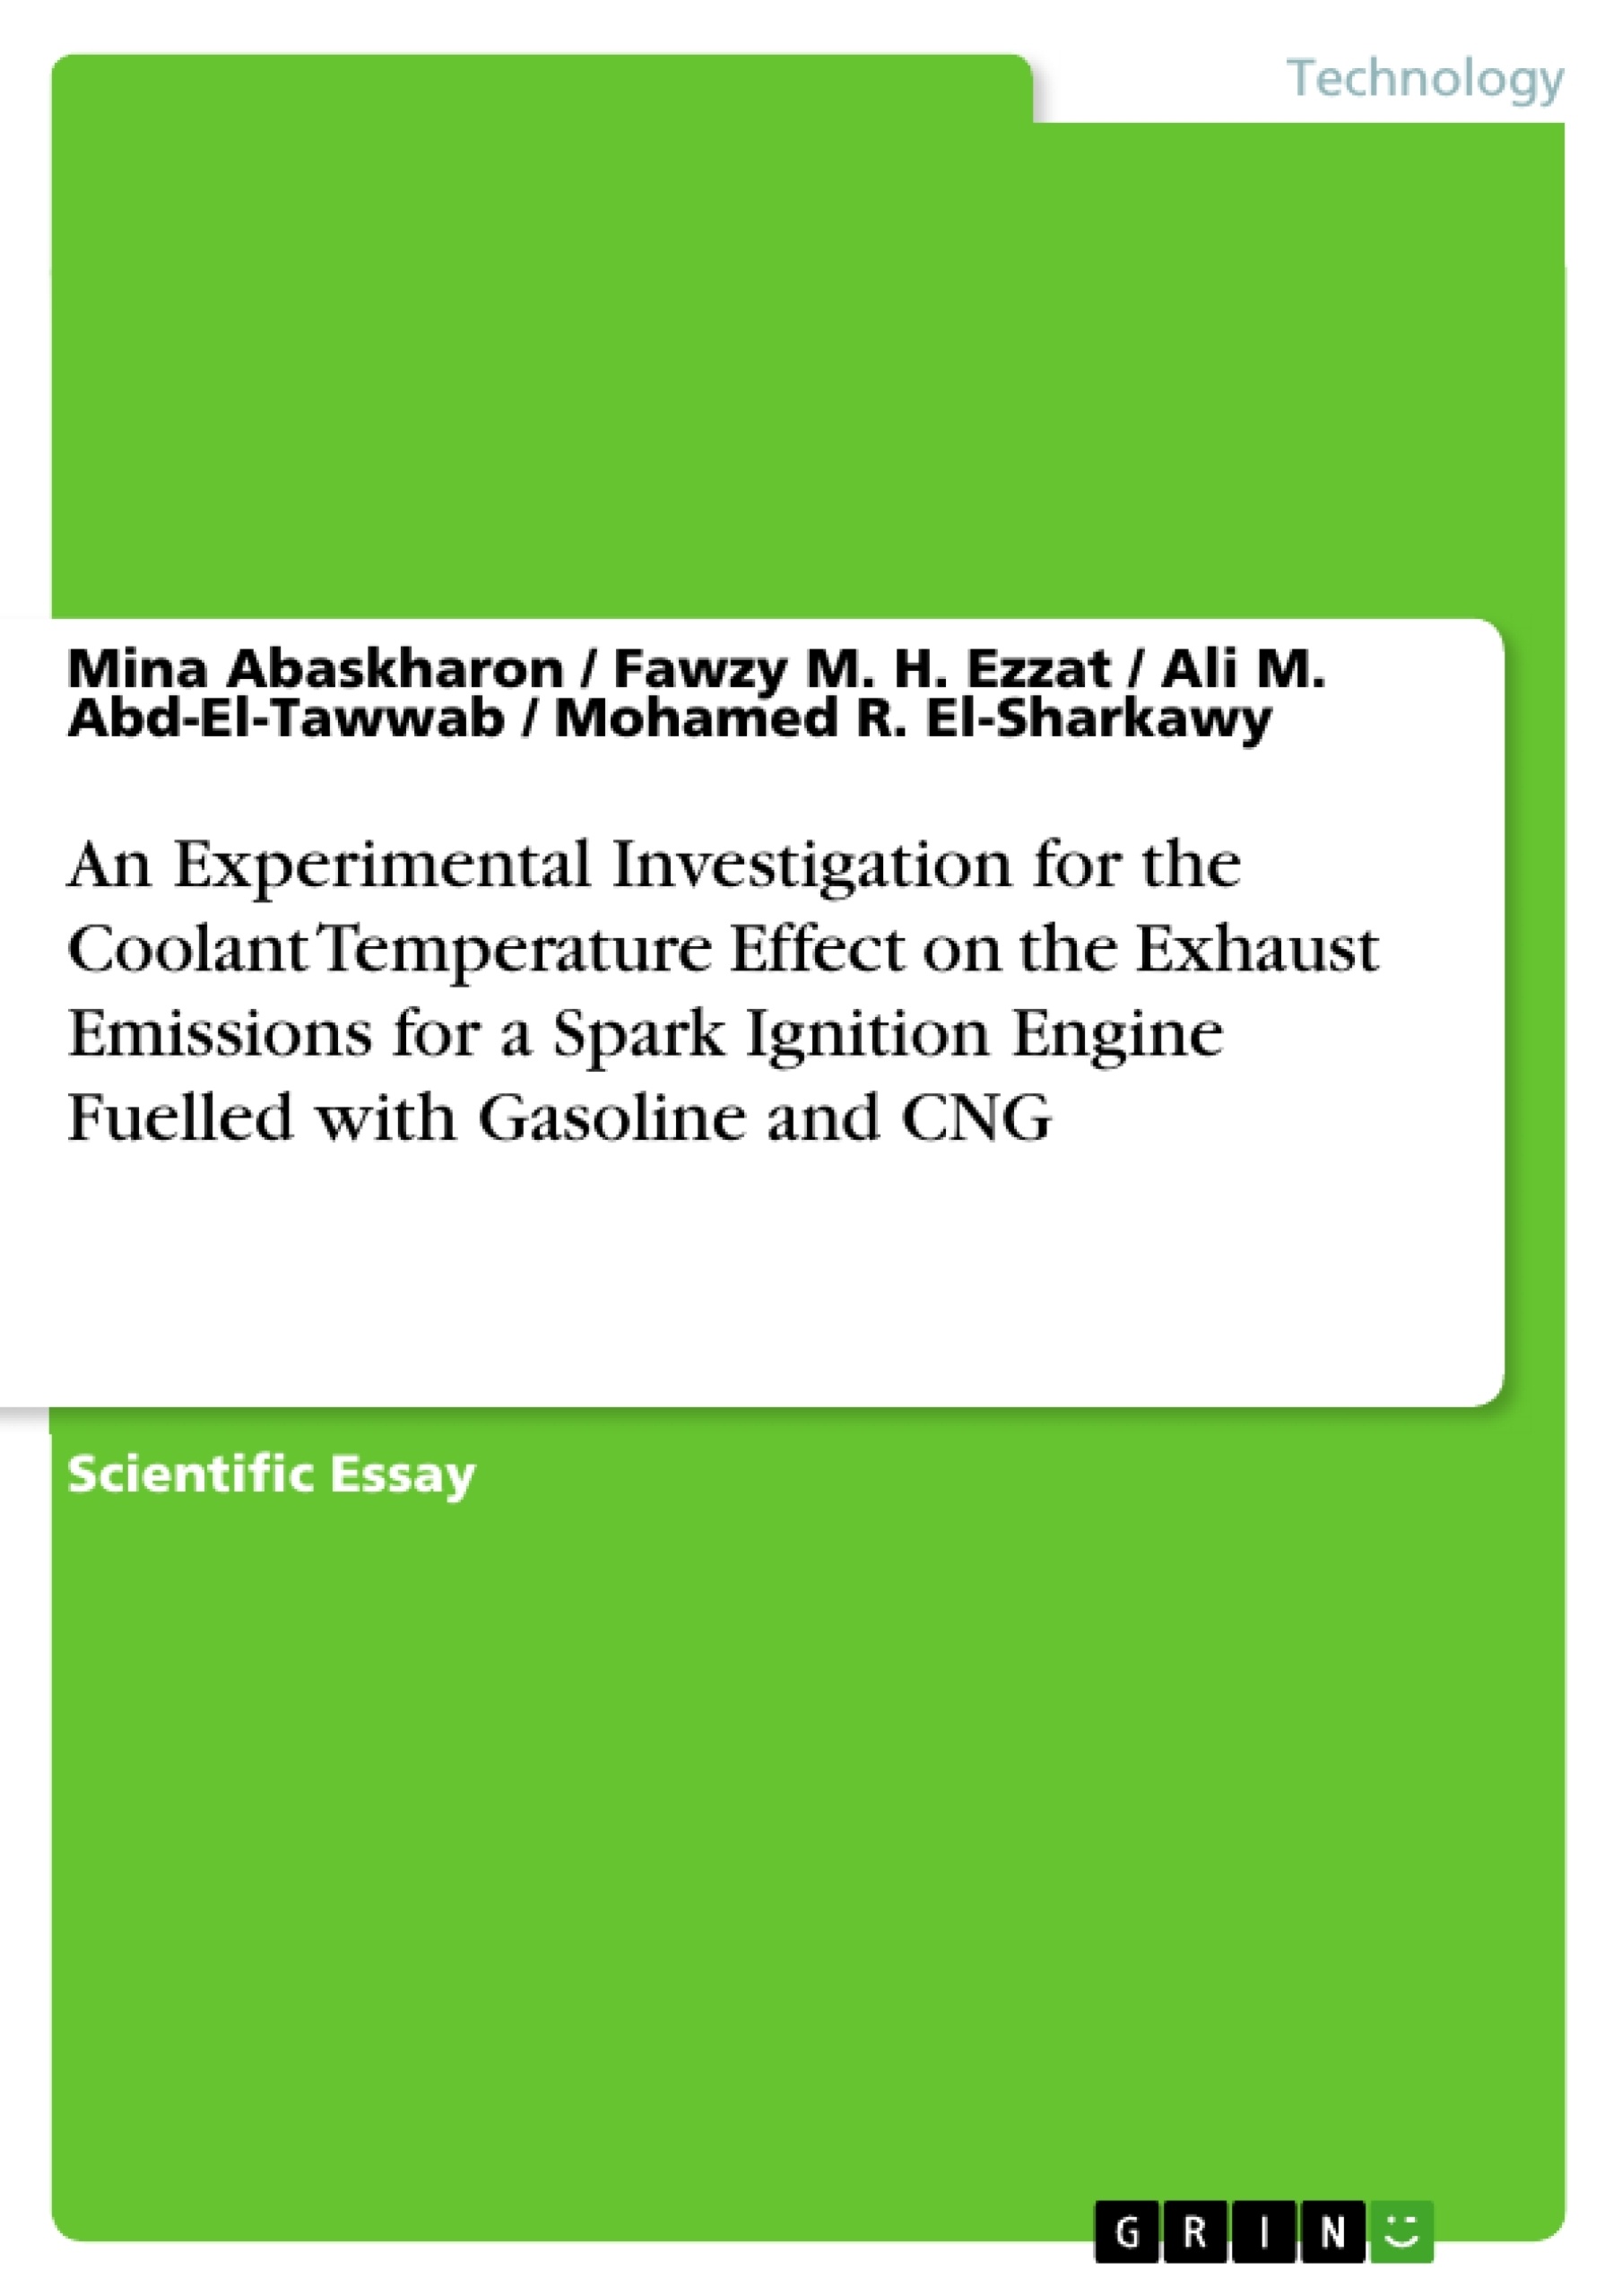 Titel: An Experimental Investigation for the Coolant Temperature Effect on the Exhaust Emissions for a Spark Ignition Engine Fuelled with Gasoline and CNG